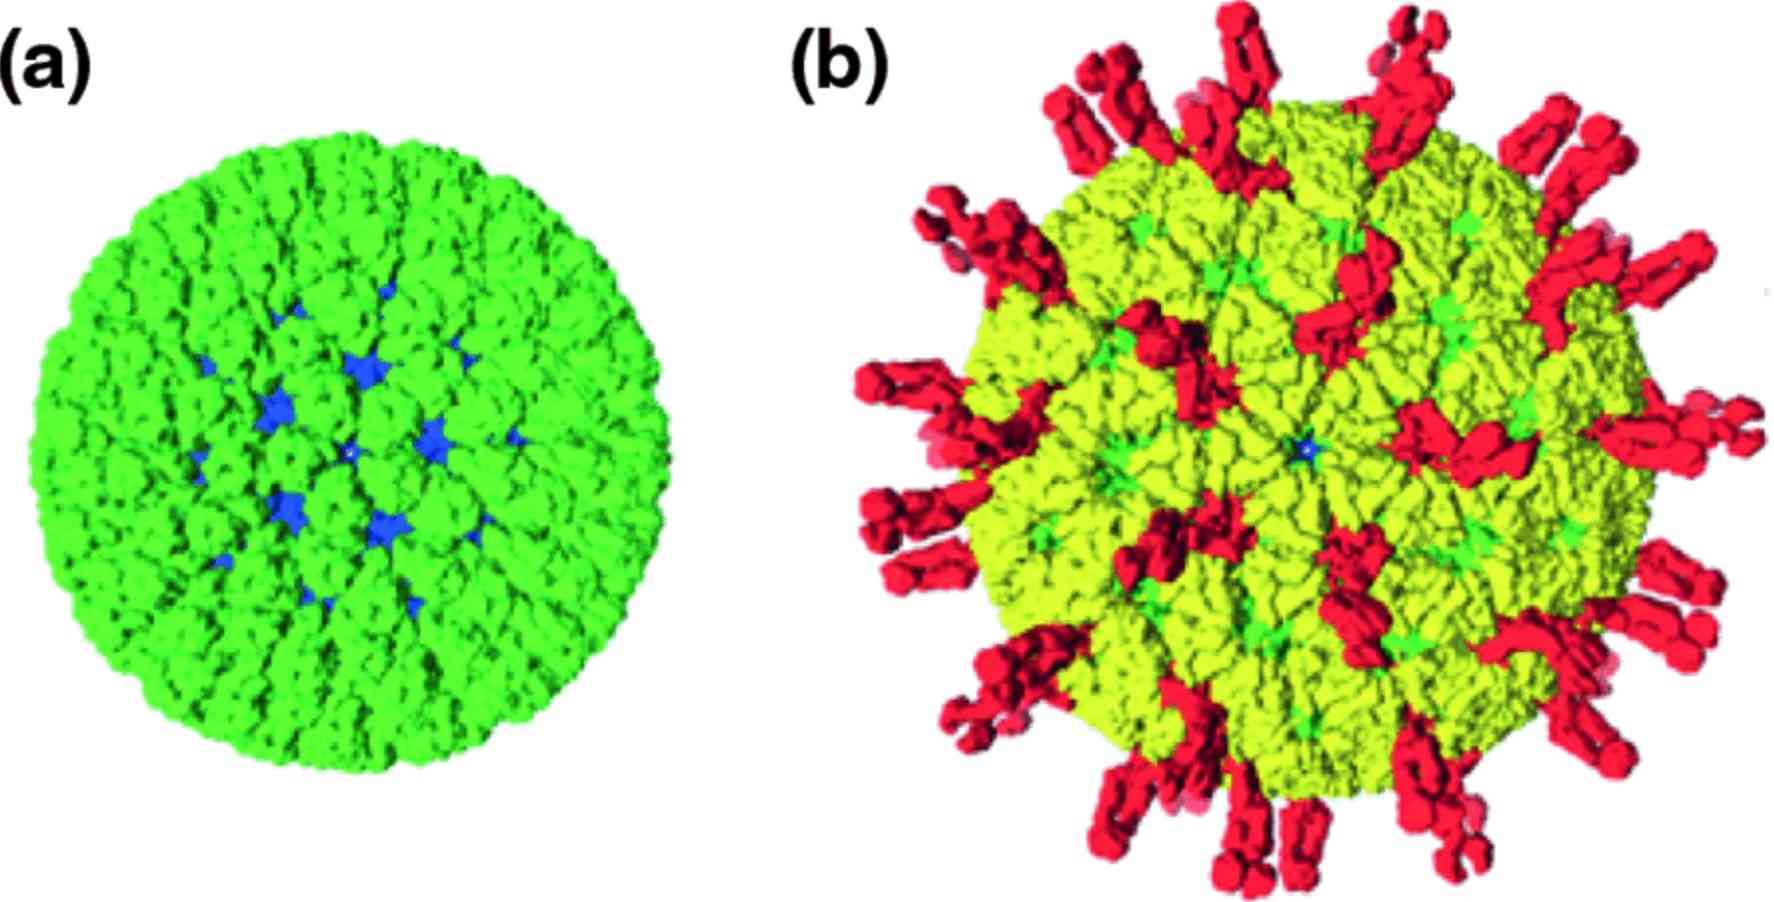 Rotaviruses particle structure.